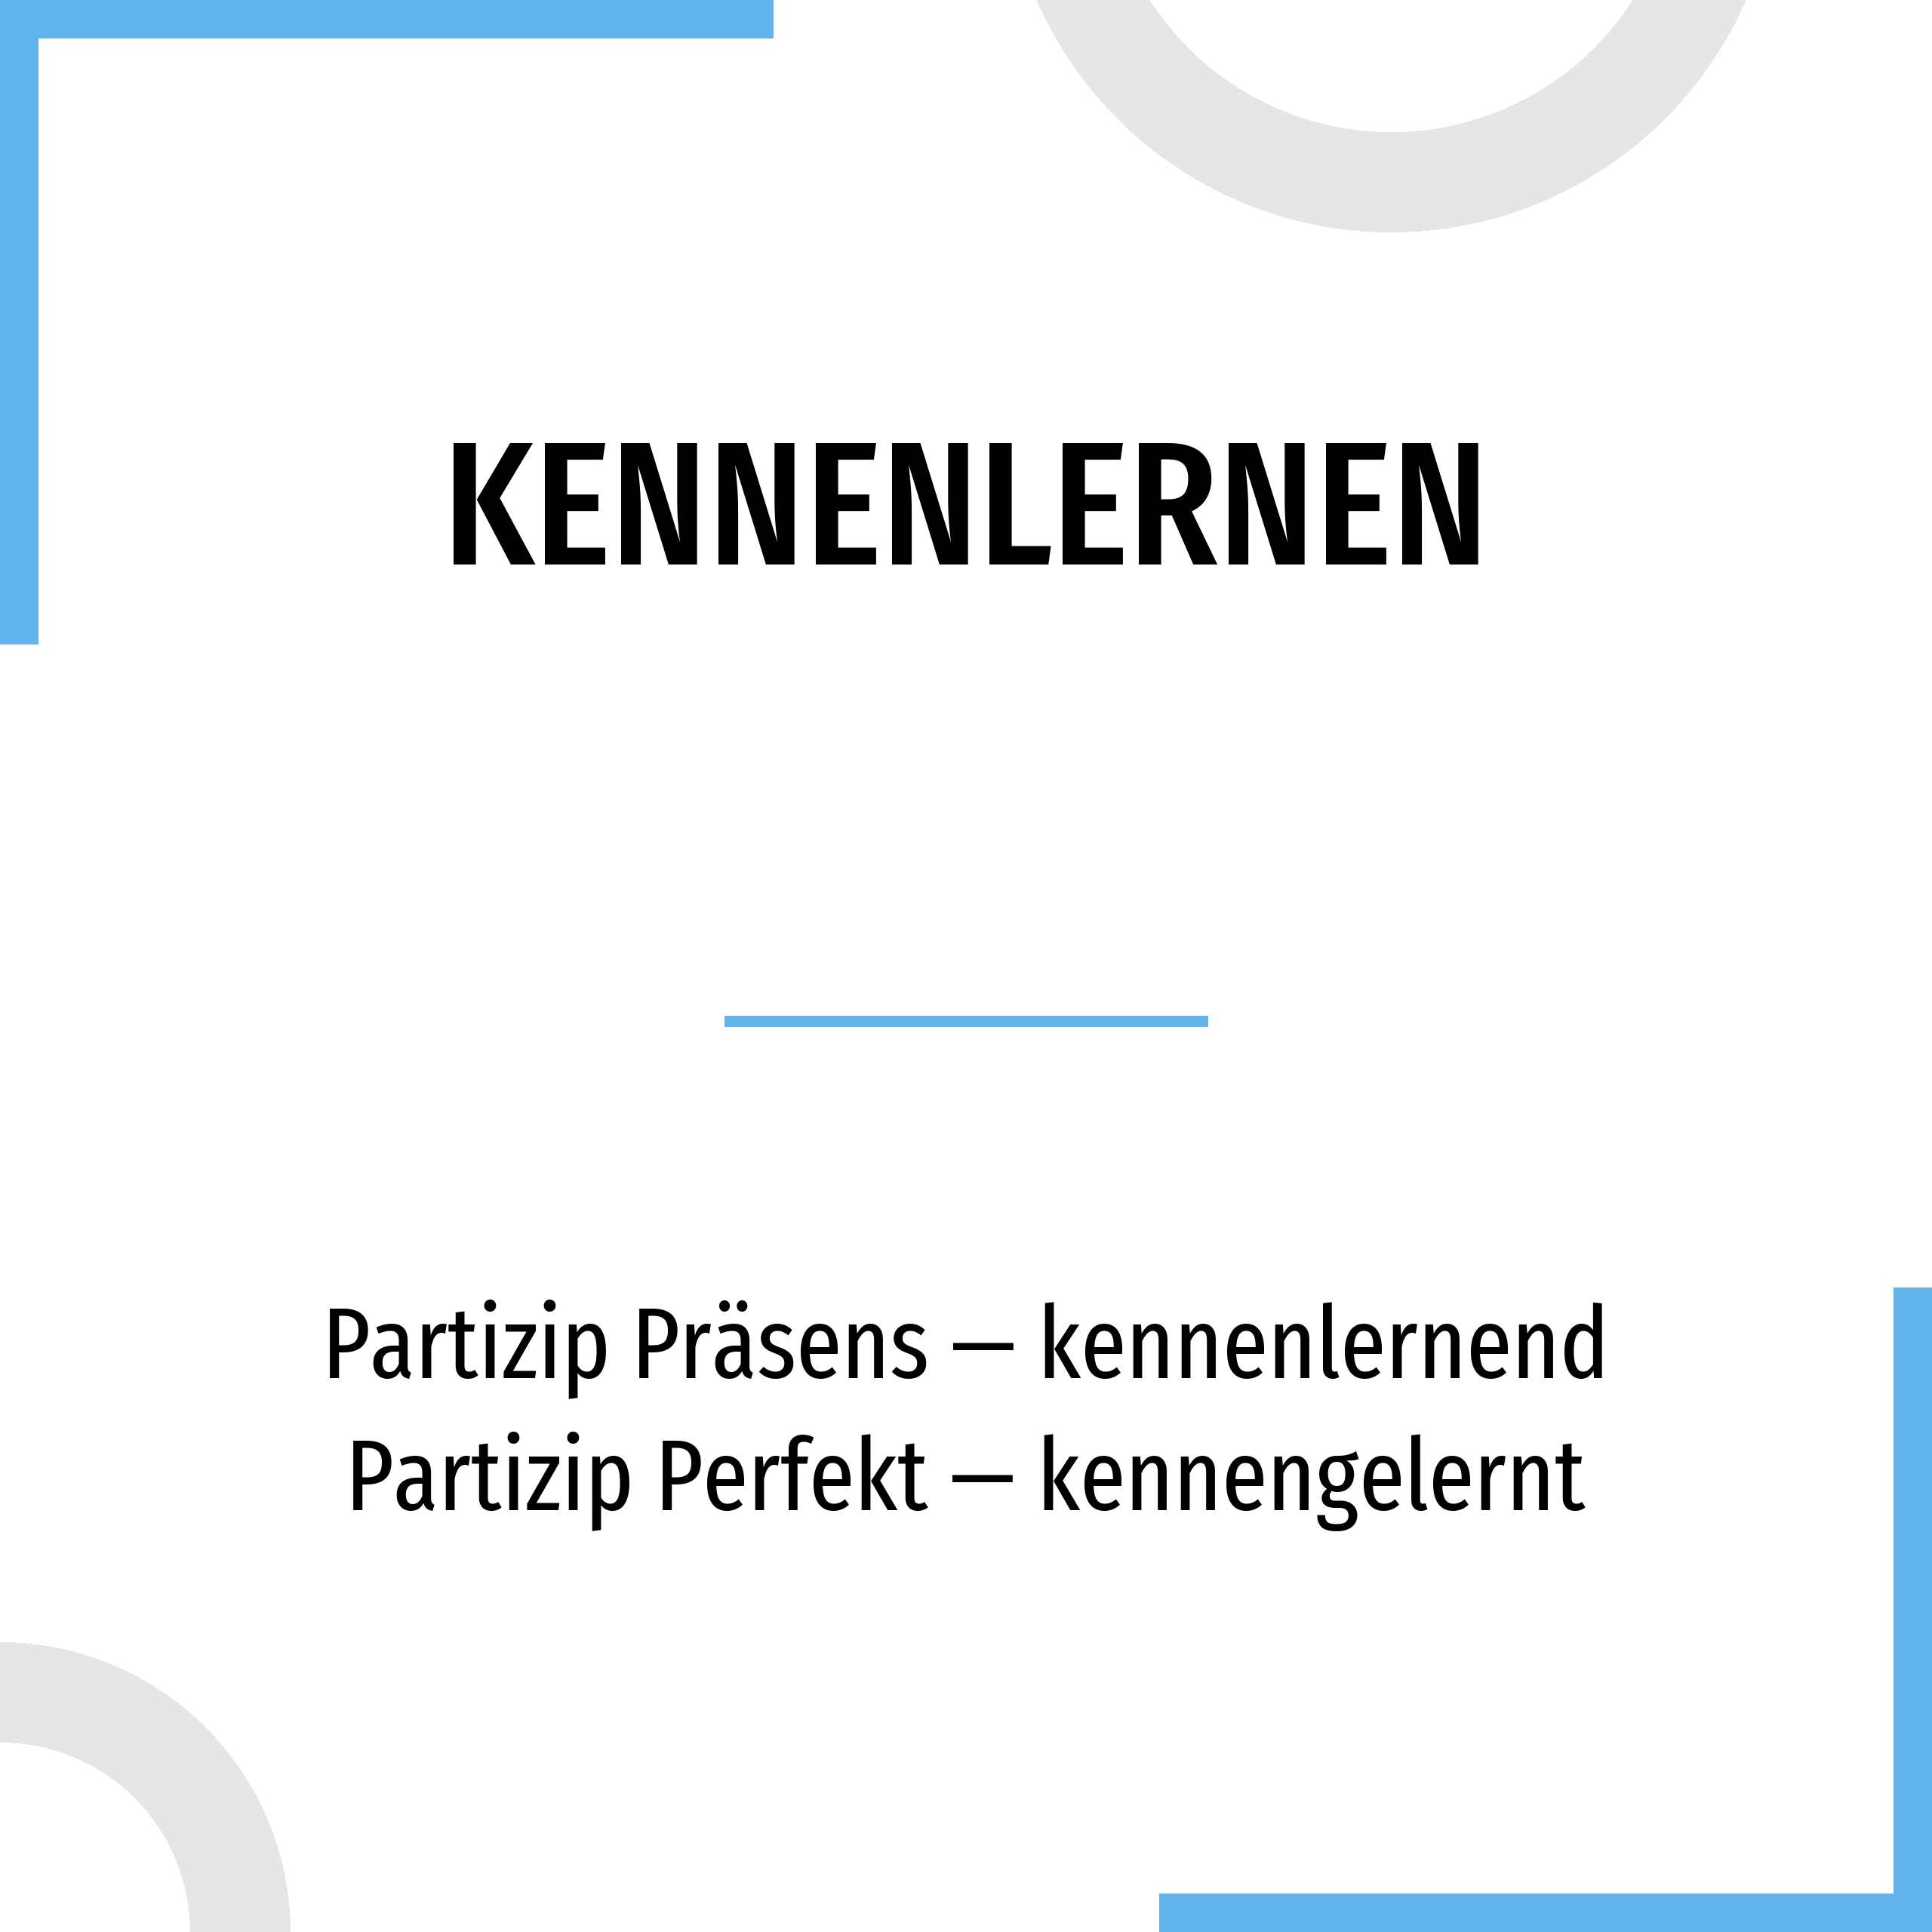 Present of the verb kennenlernen